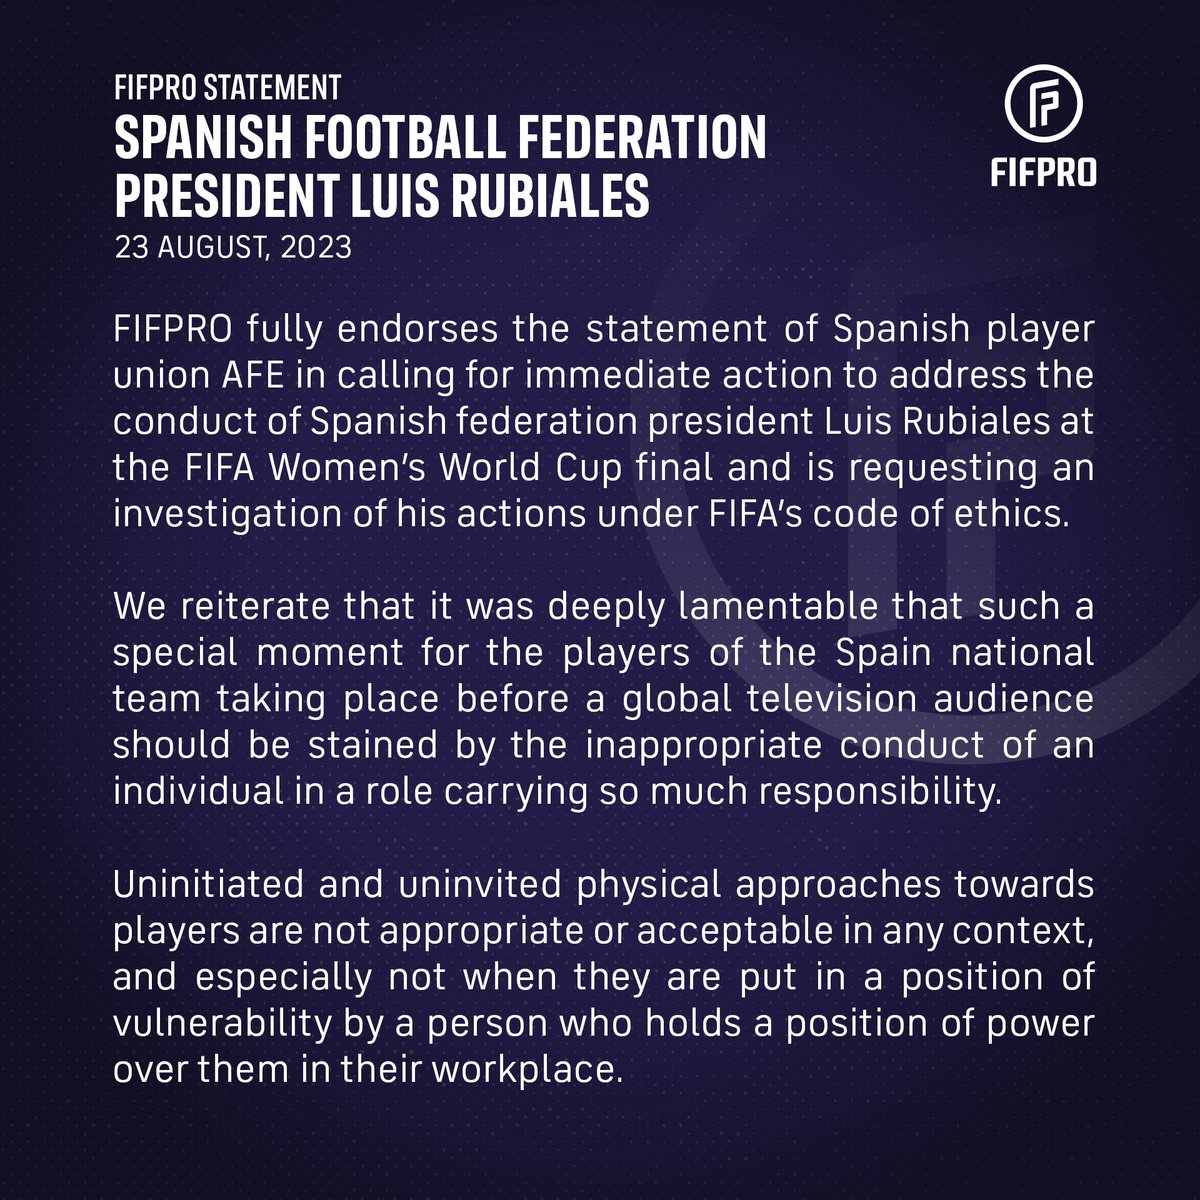 #FIFPRO statement on Spanish football federation president Luis Rubiales: